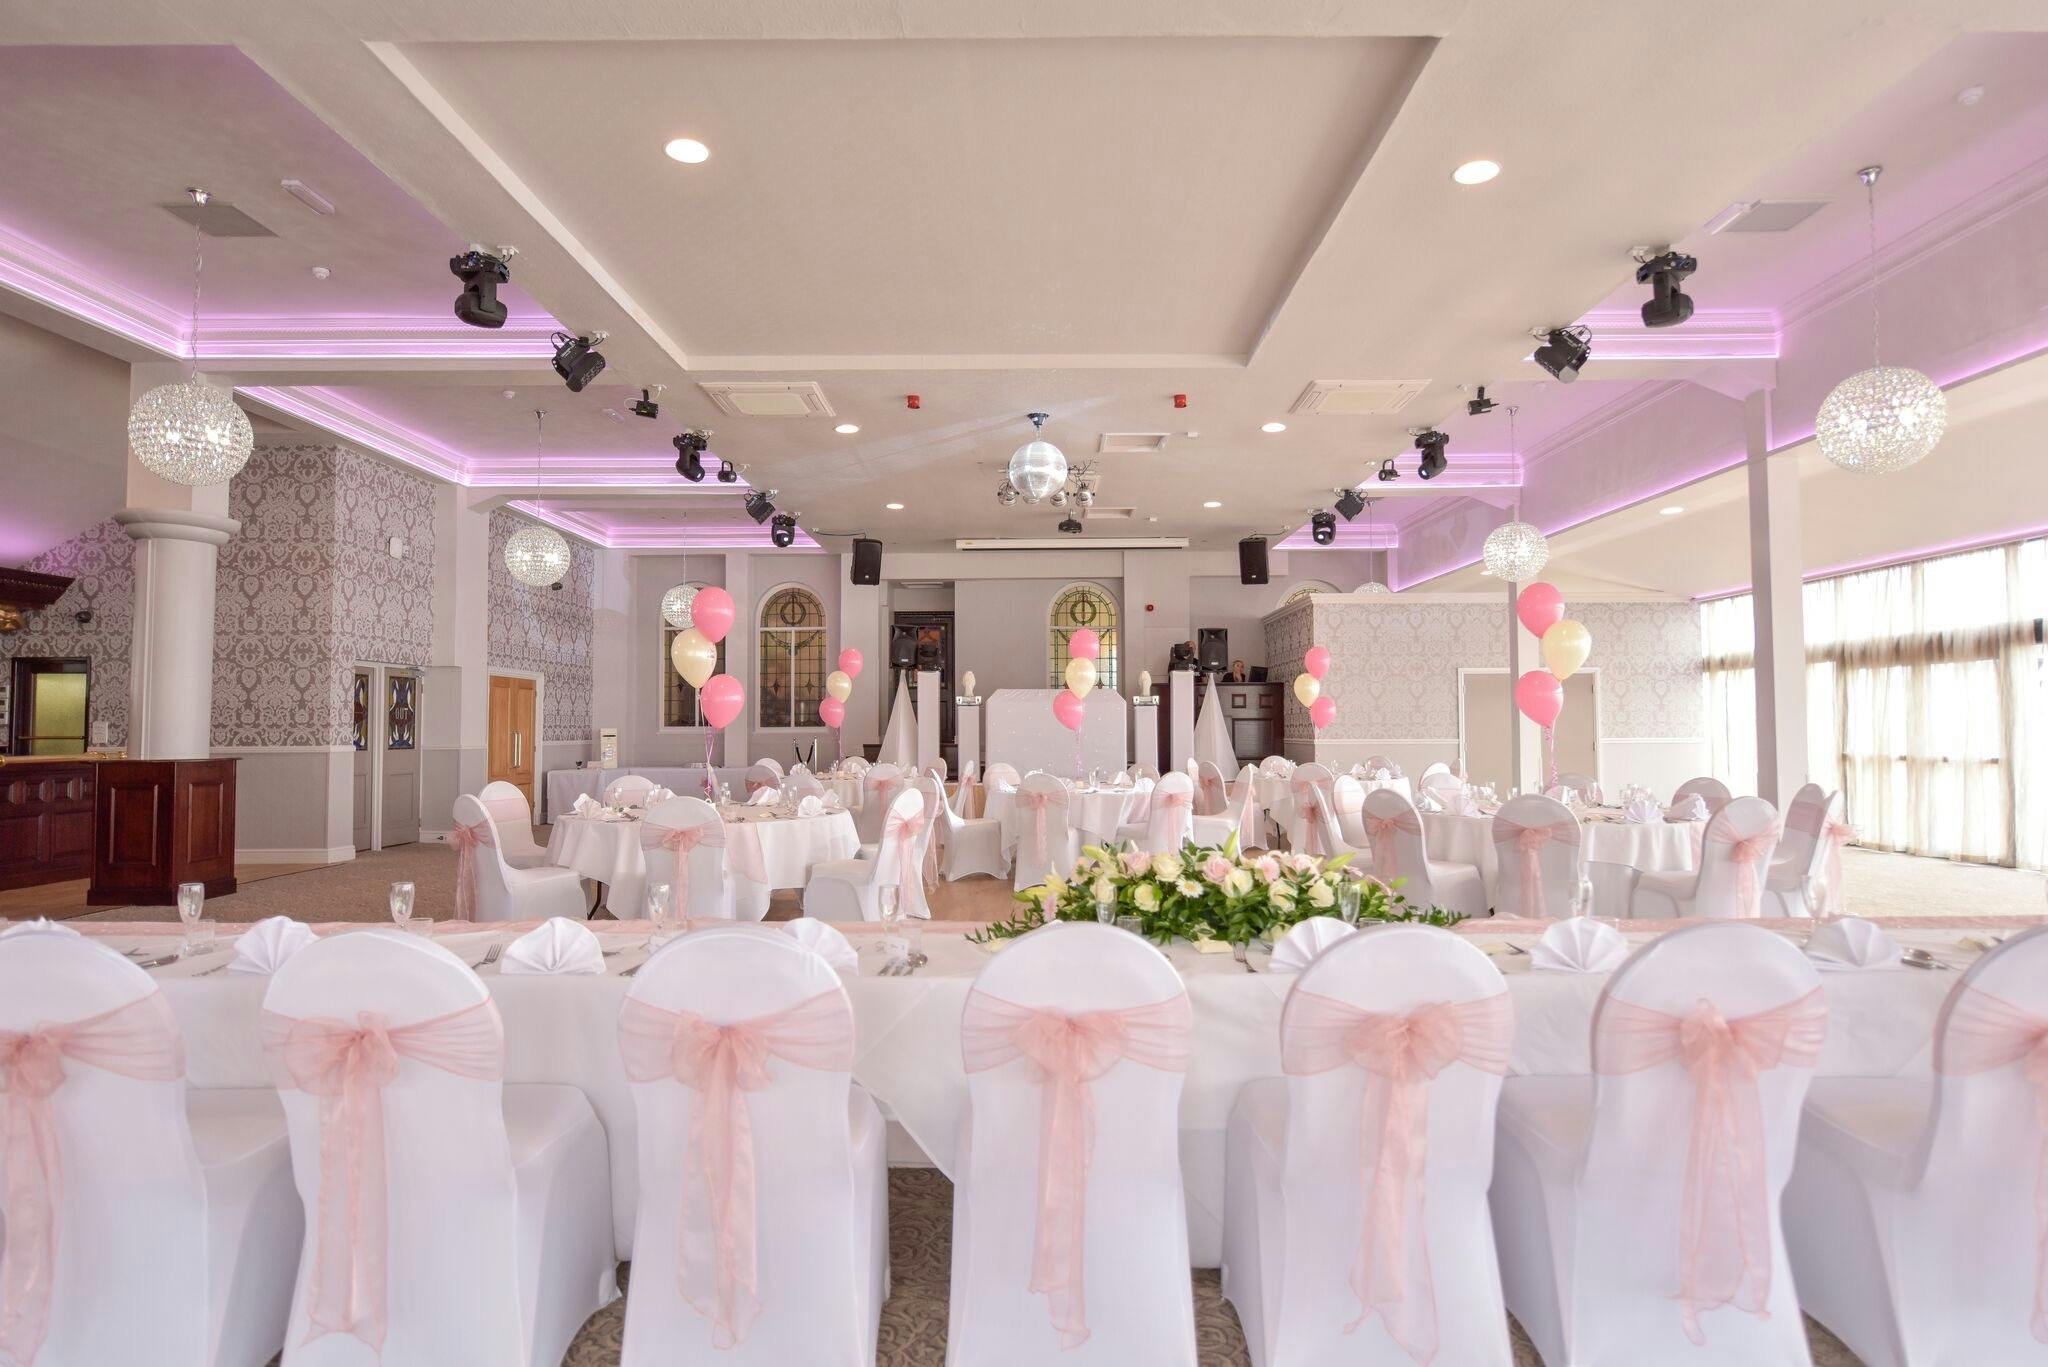 Enjoy Any Occasion at the perfect venue